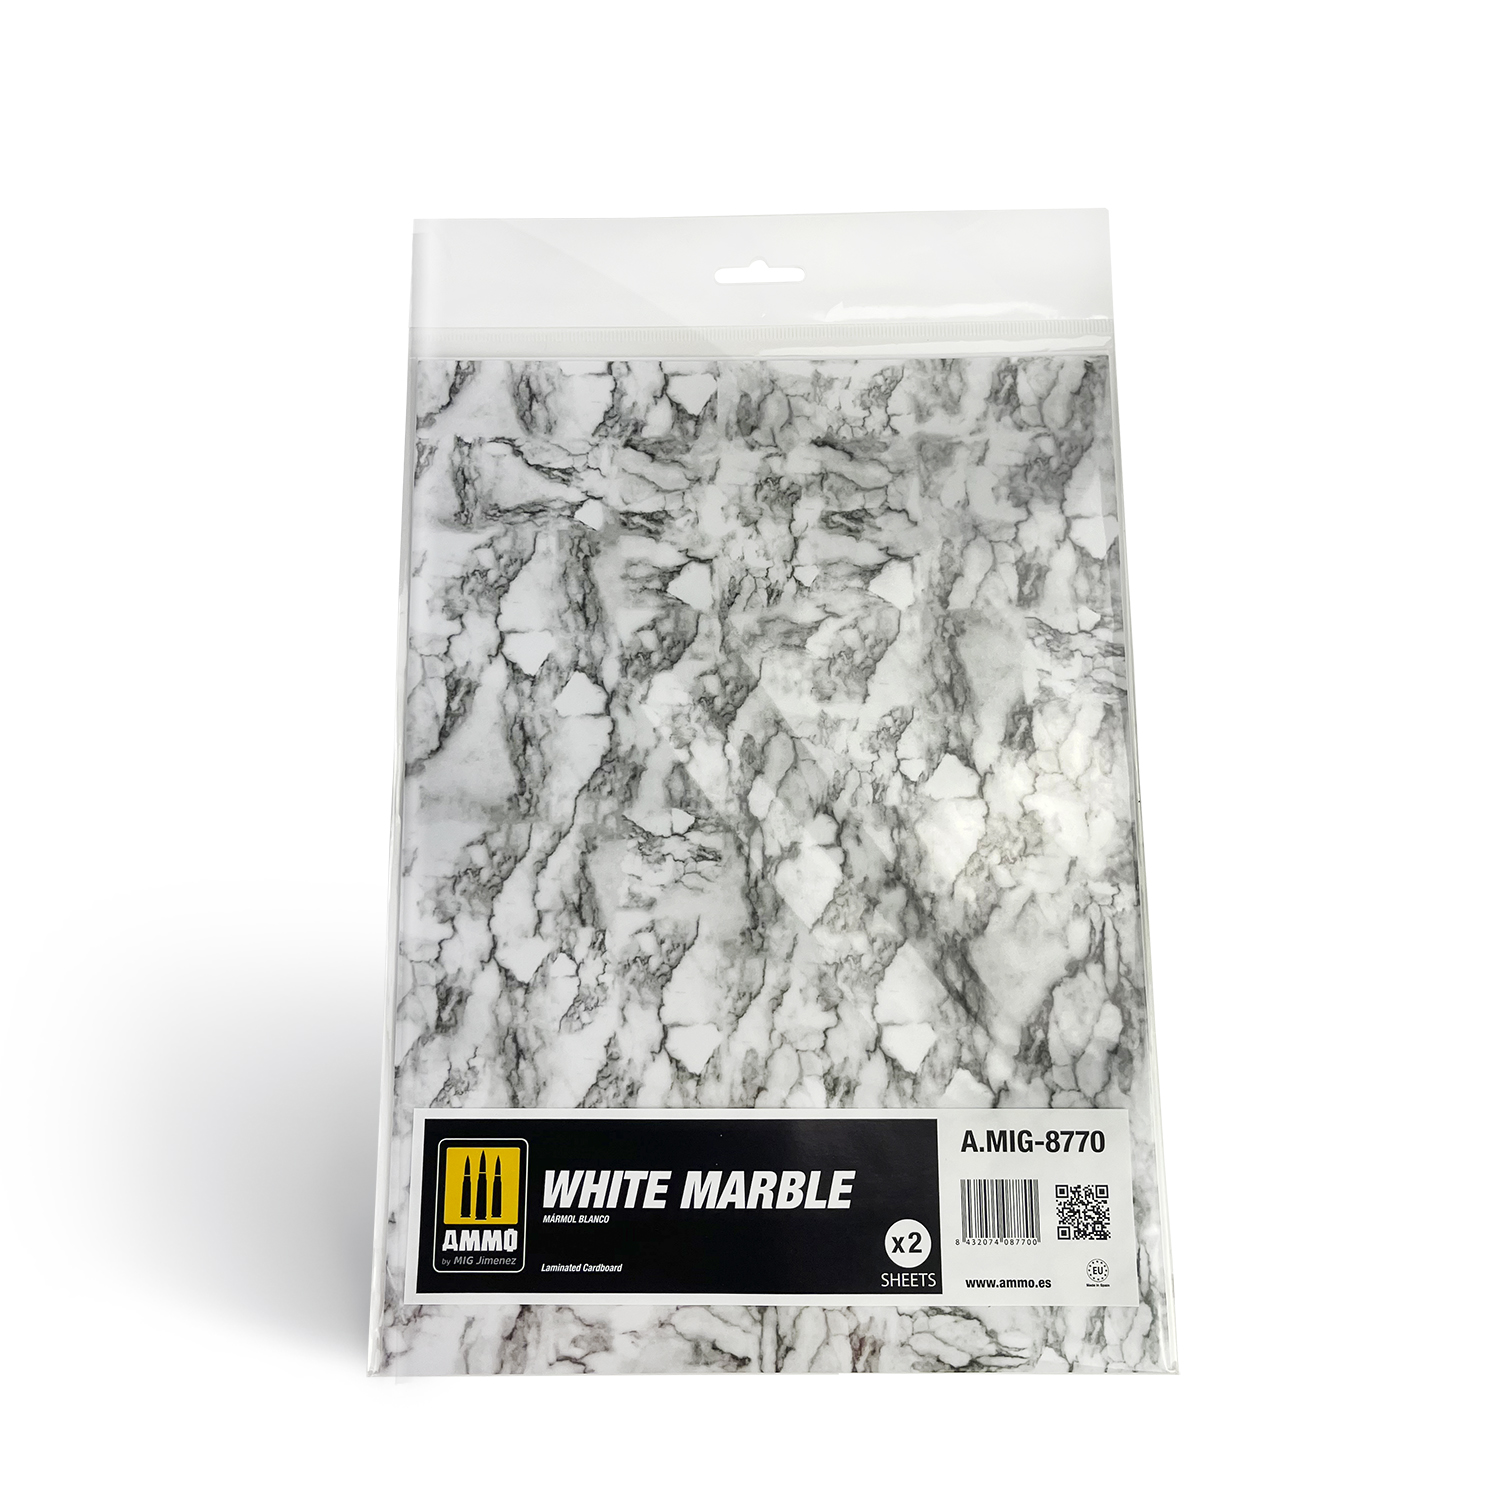 MIG8770 White Marble. Sheet of marble